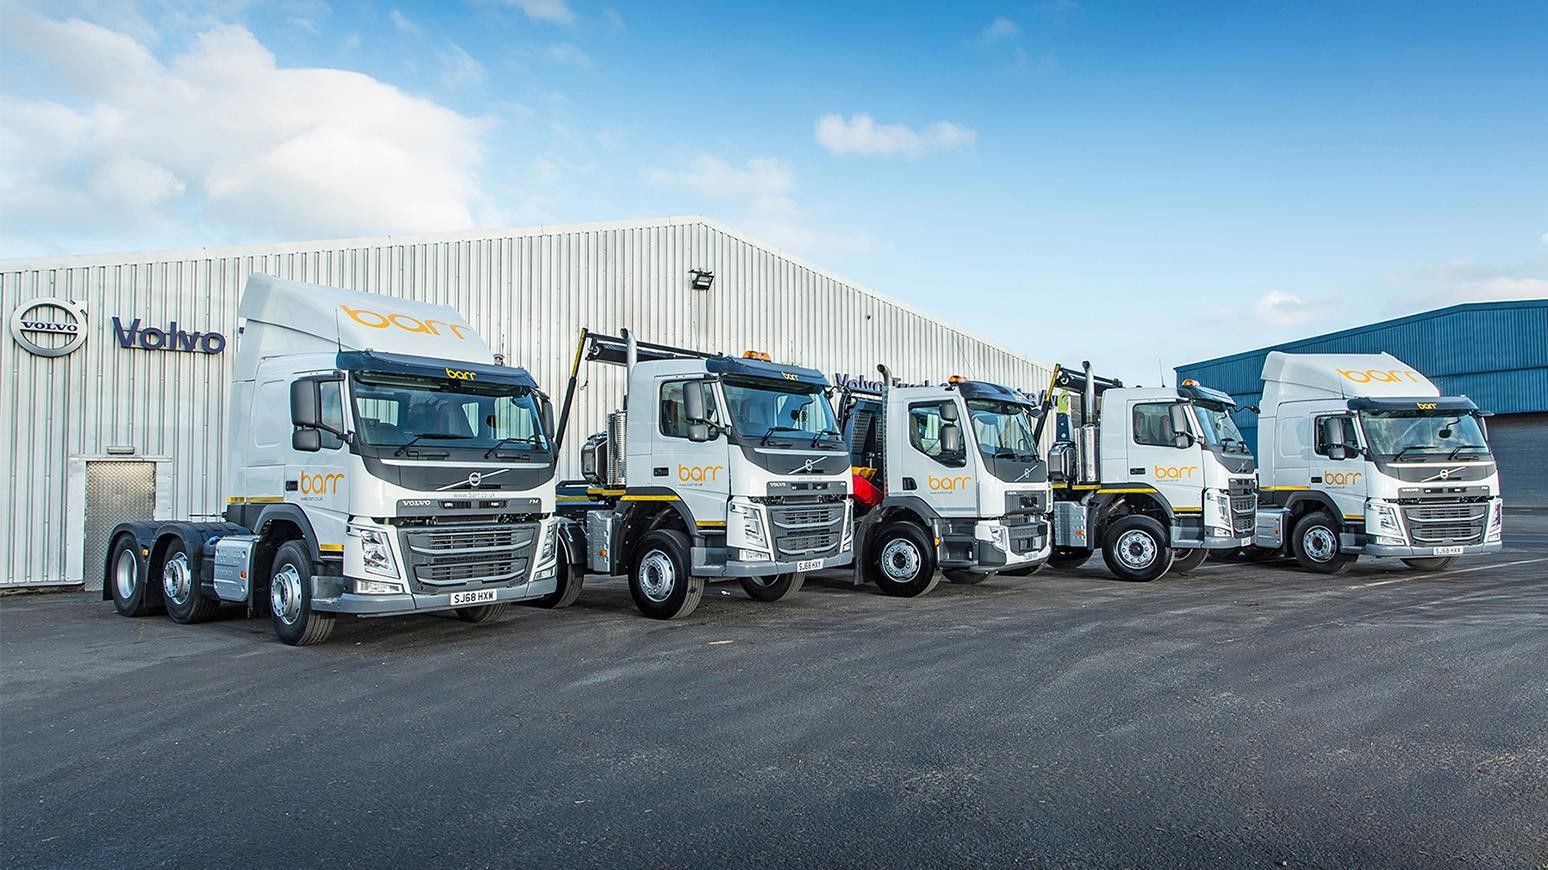 Scottish Waste Management Company Adds Five New Trucks To Its All-Volvo Fleet